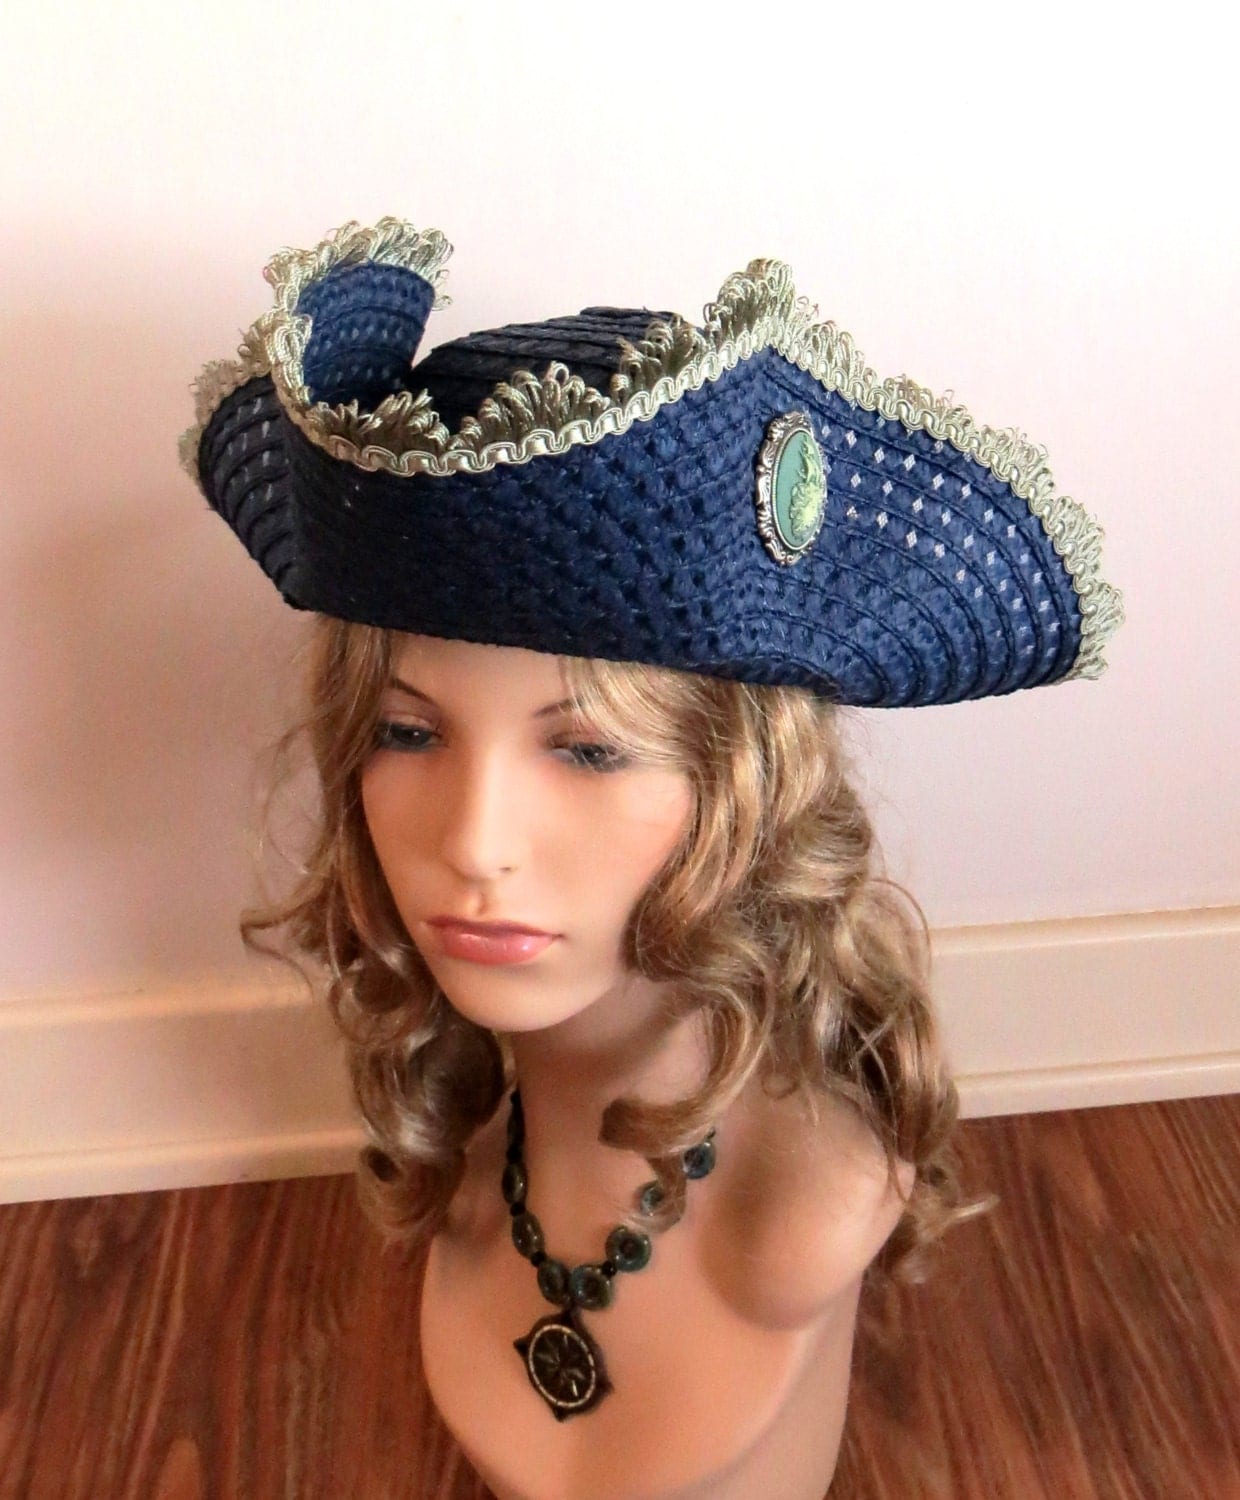 Pirate Tricorn Hat in Blue and Green Trim with Cameo